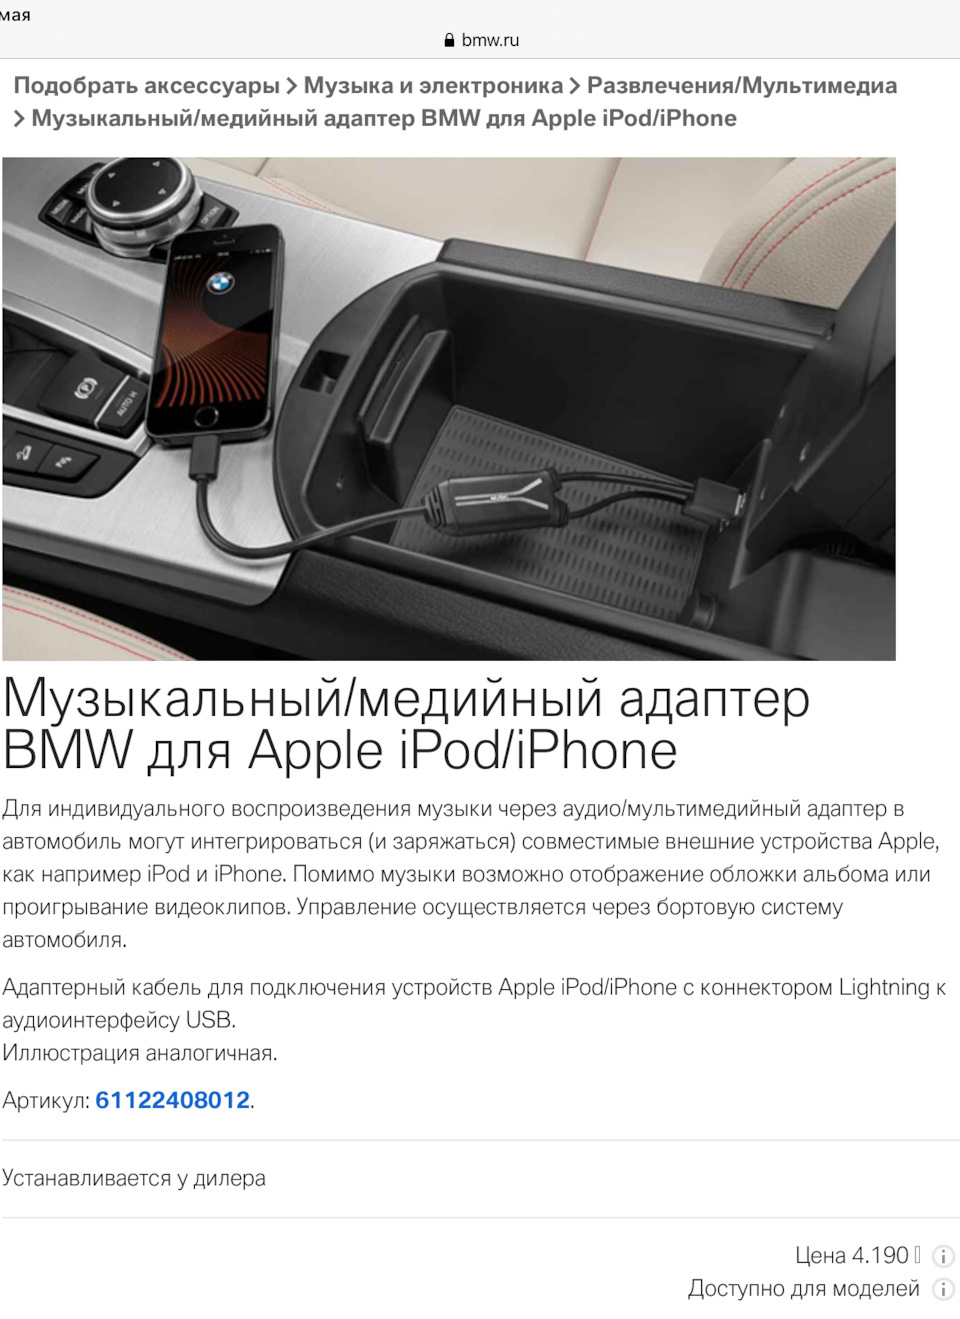 61122408012 - Genuine BMW iPhone Lightning USB Y Cable Audio Music